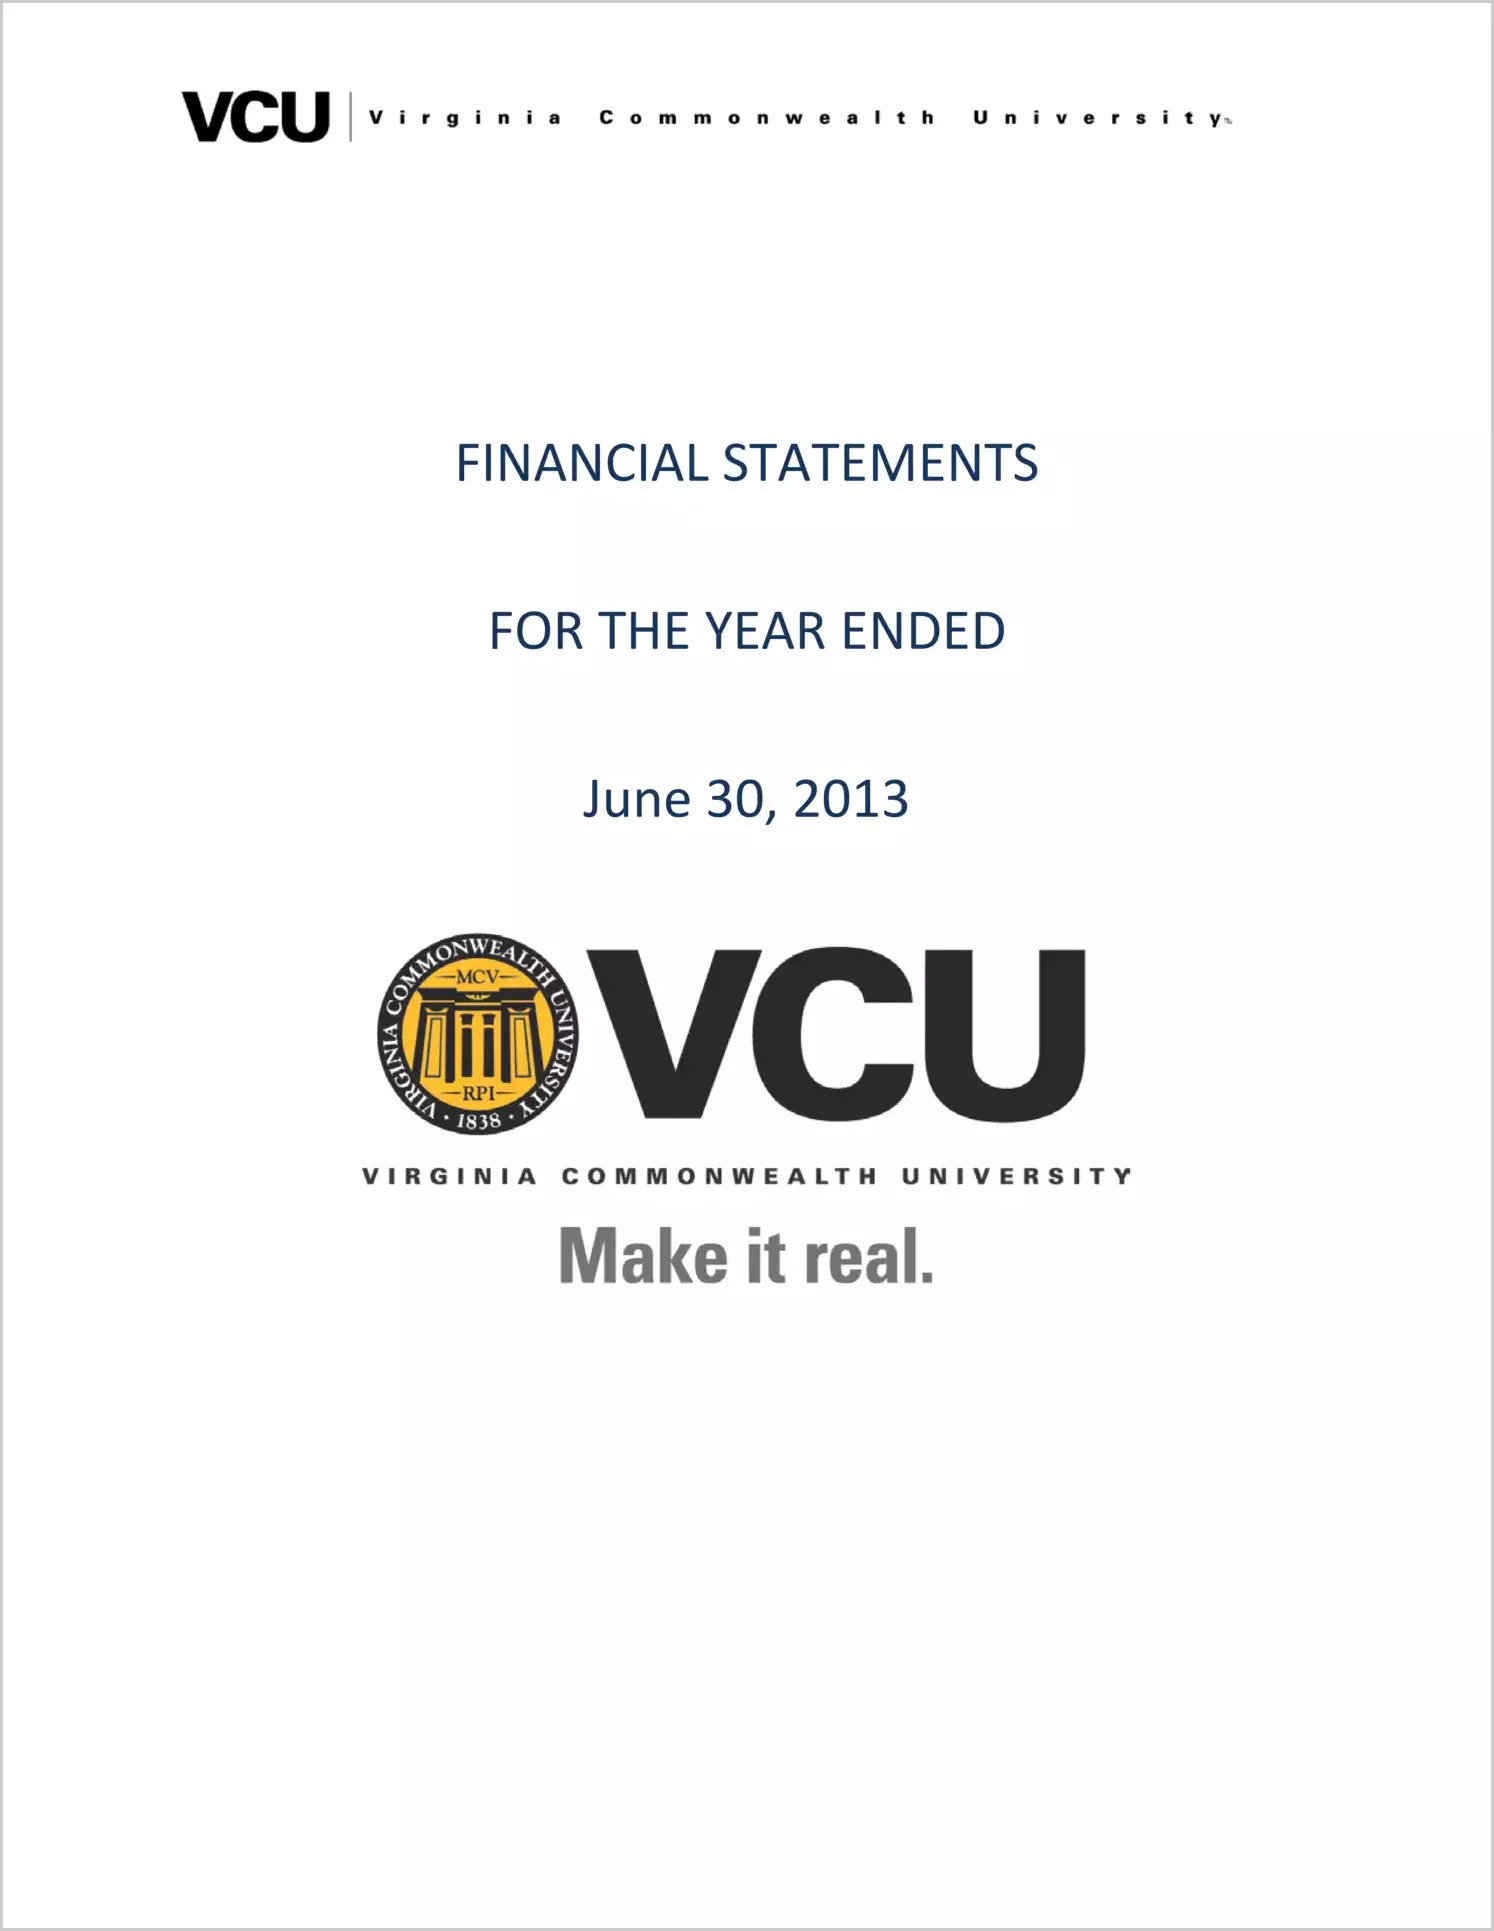 Virginia Commonwealth University Financial Statements for the year ended June 30, 2013